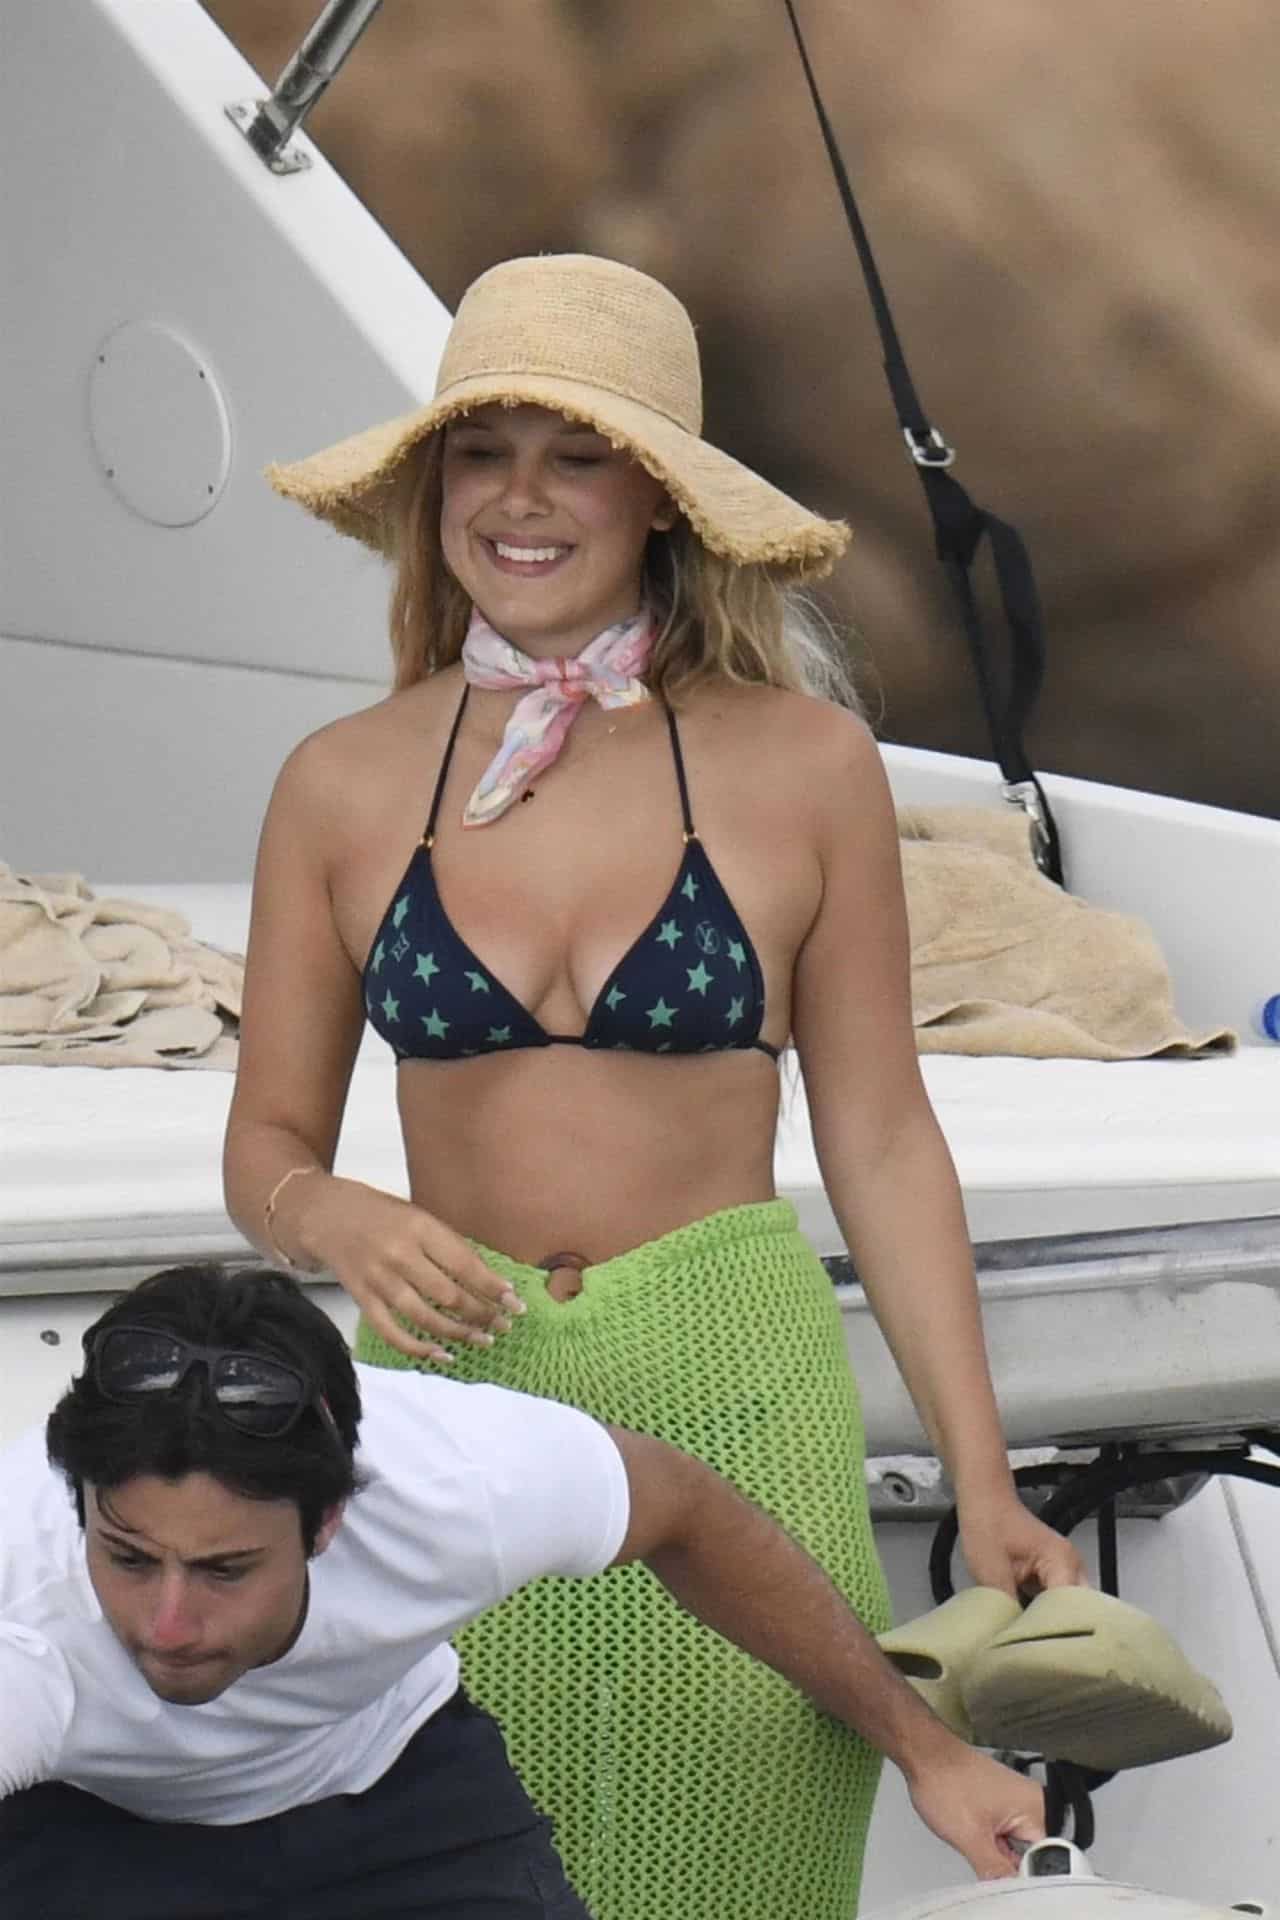 Millie Bobby Brown in a Bikini Top with Stars on a Luxury Yacht in Italy